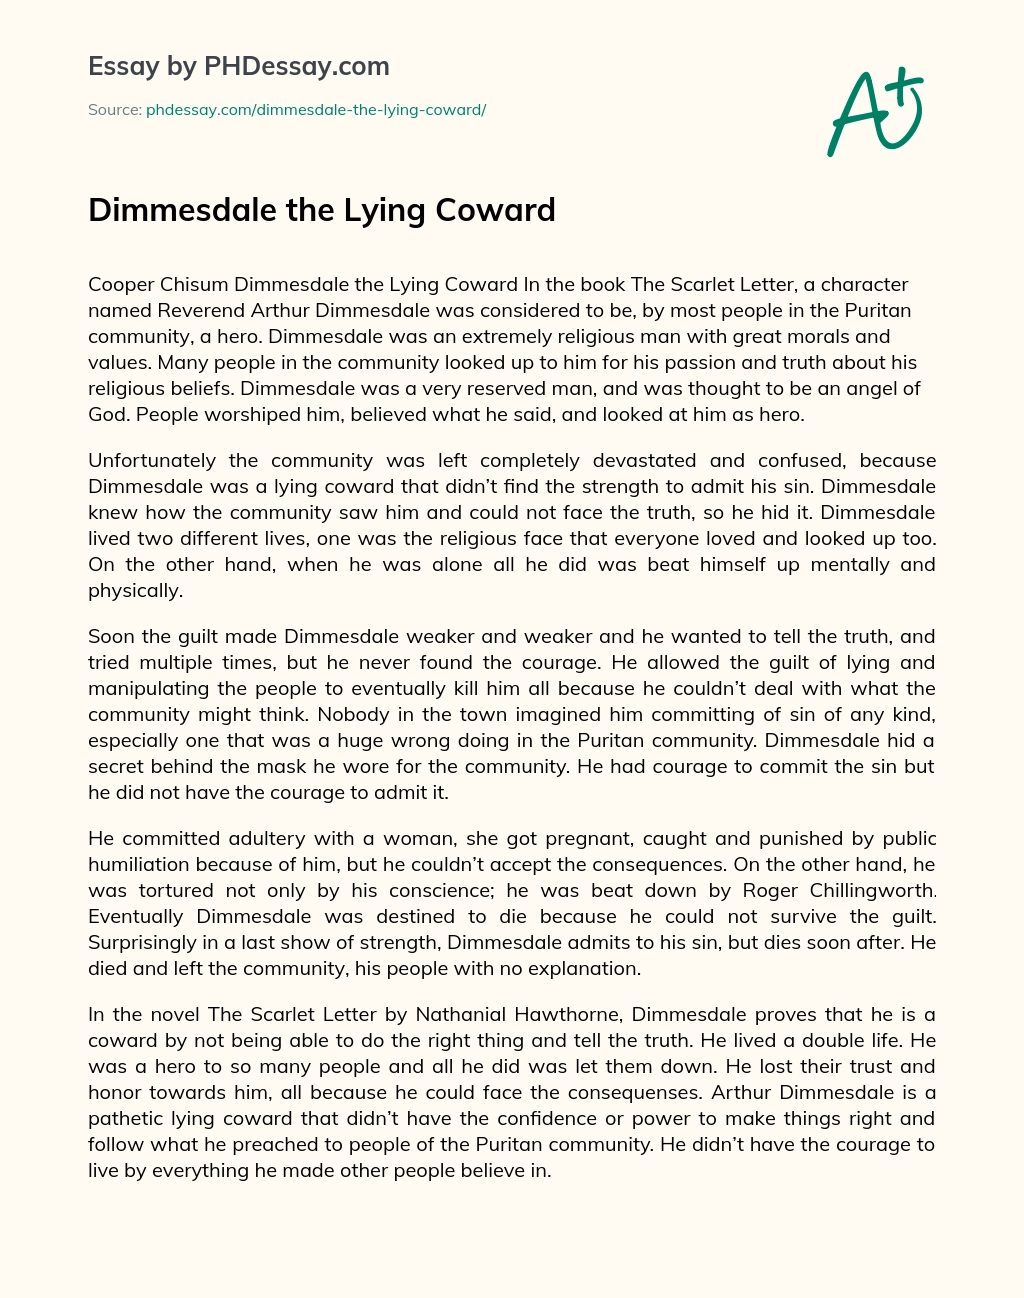 Dimmesdale the Lying Coward essay